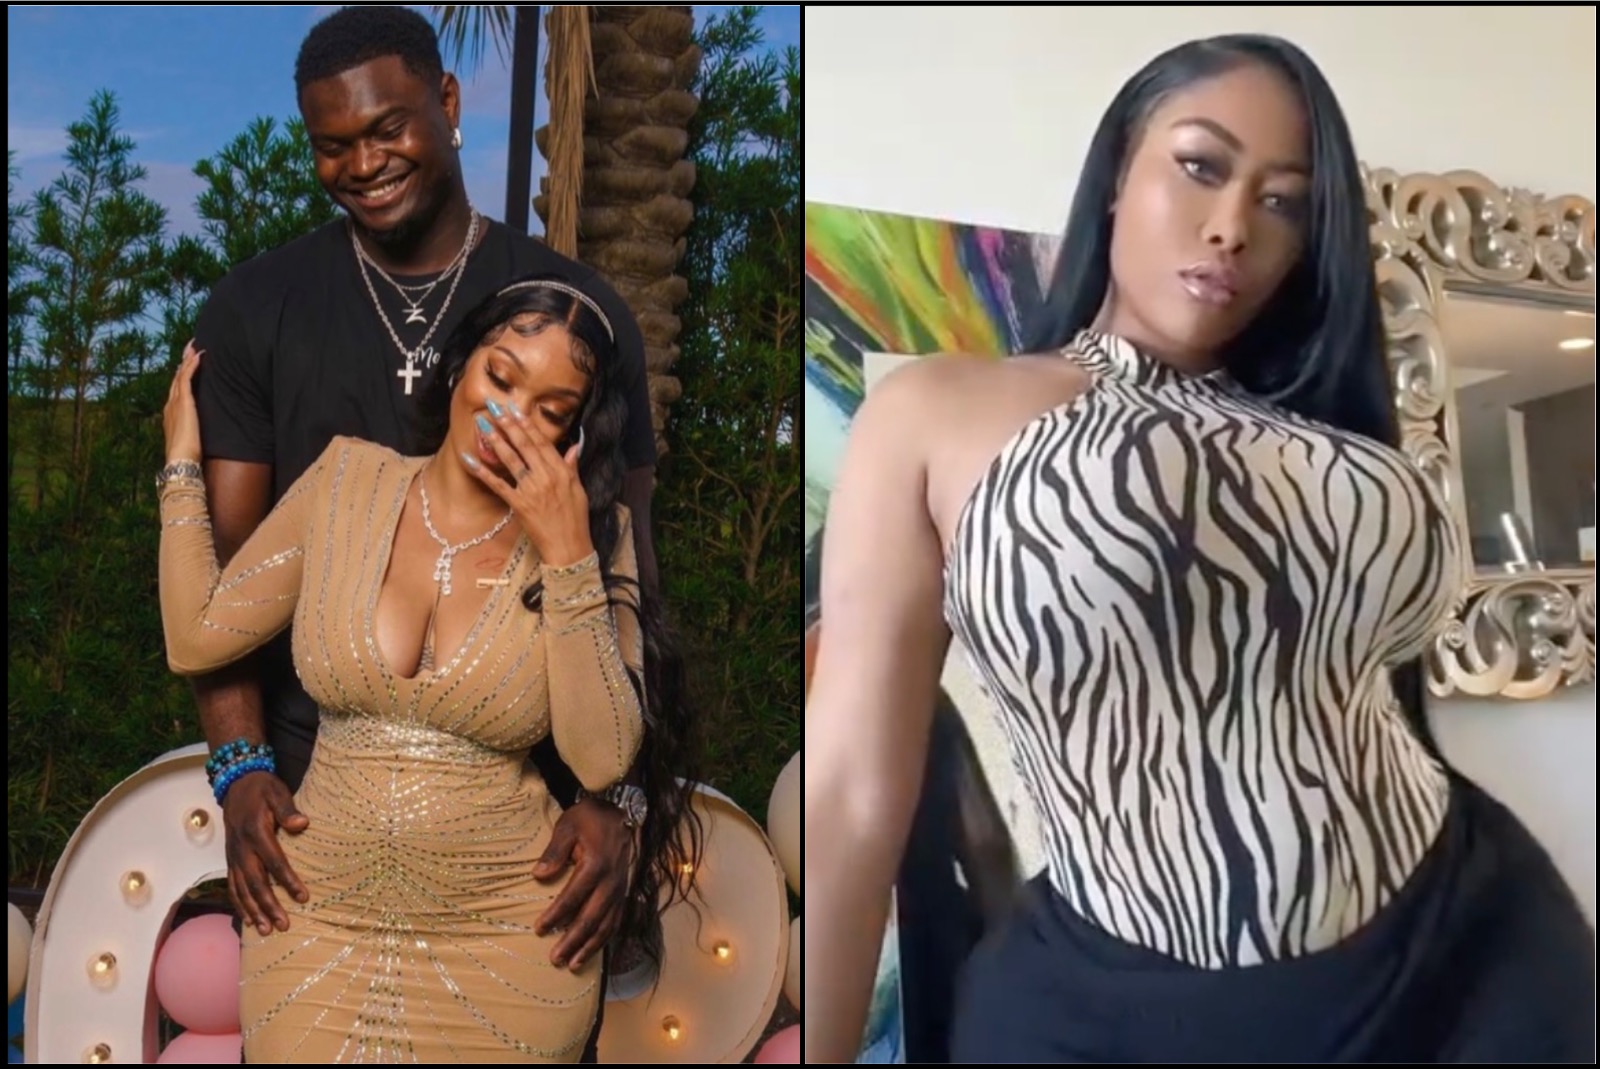 IG Model Moriah Mills Exposes Zion Williamson After He Announced He’s Having Baby With Ahkeema